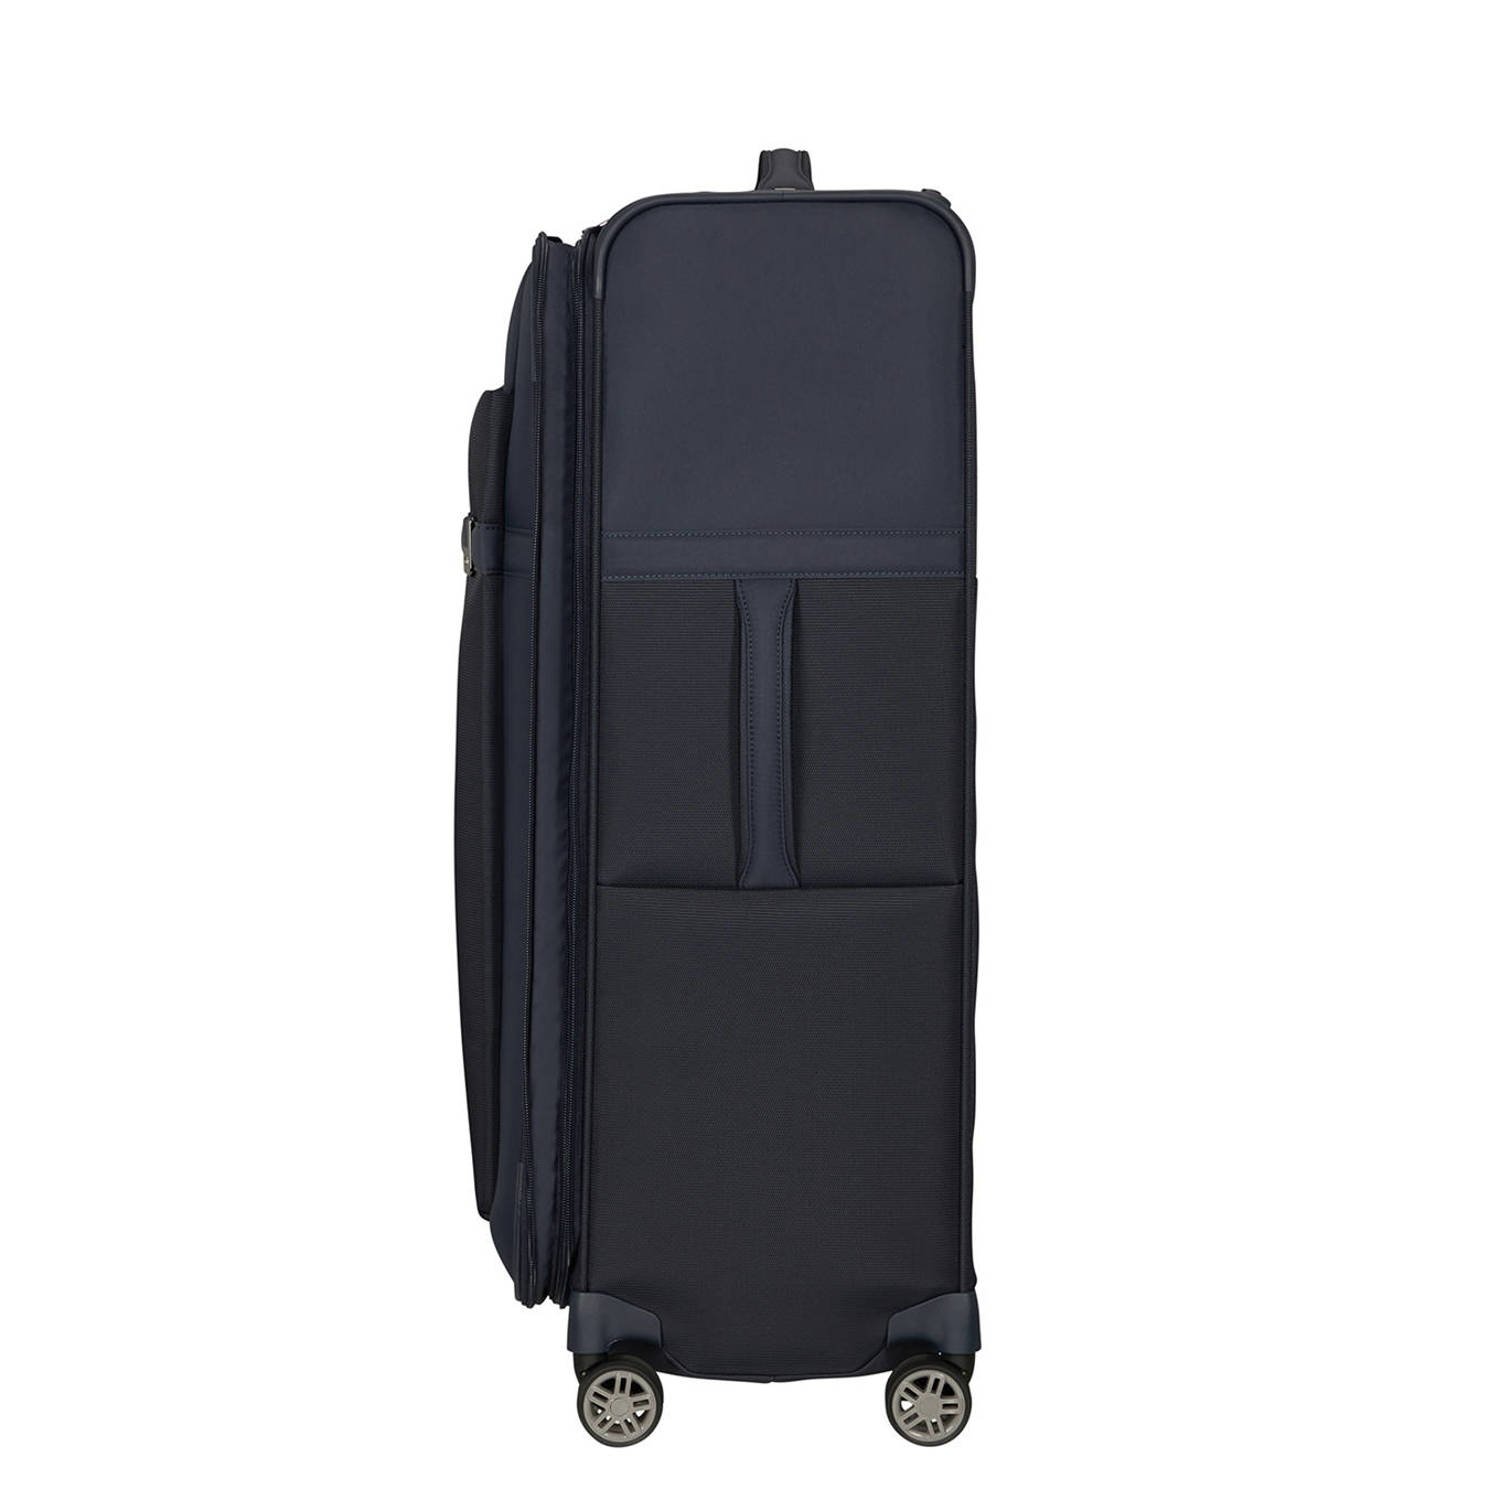 Samsonite trolley Airea 78 cm. Expandable donkerblauw